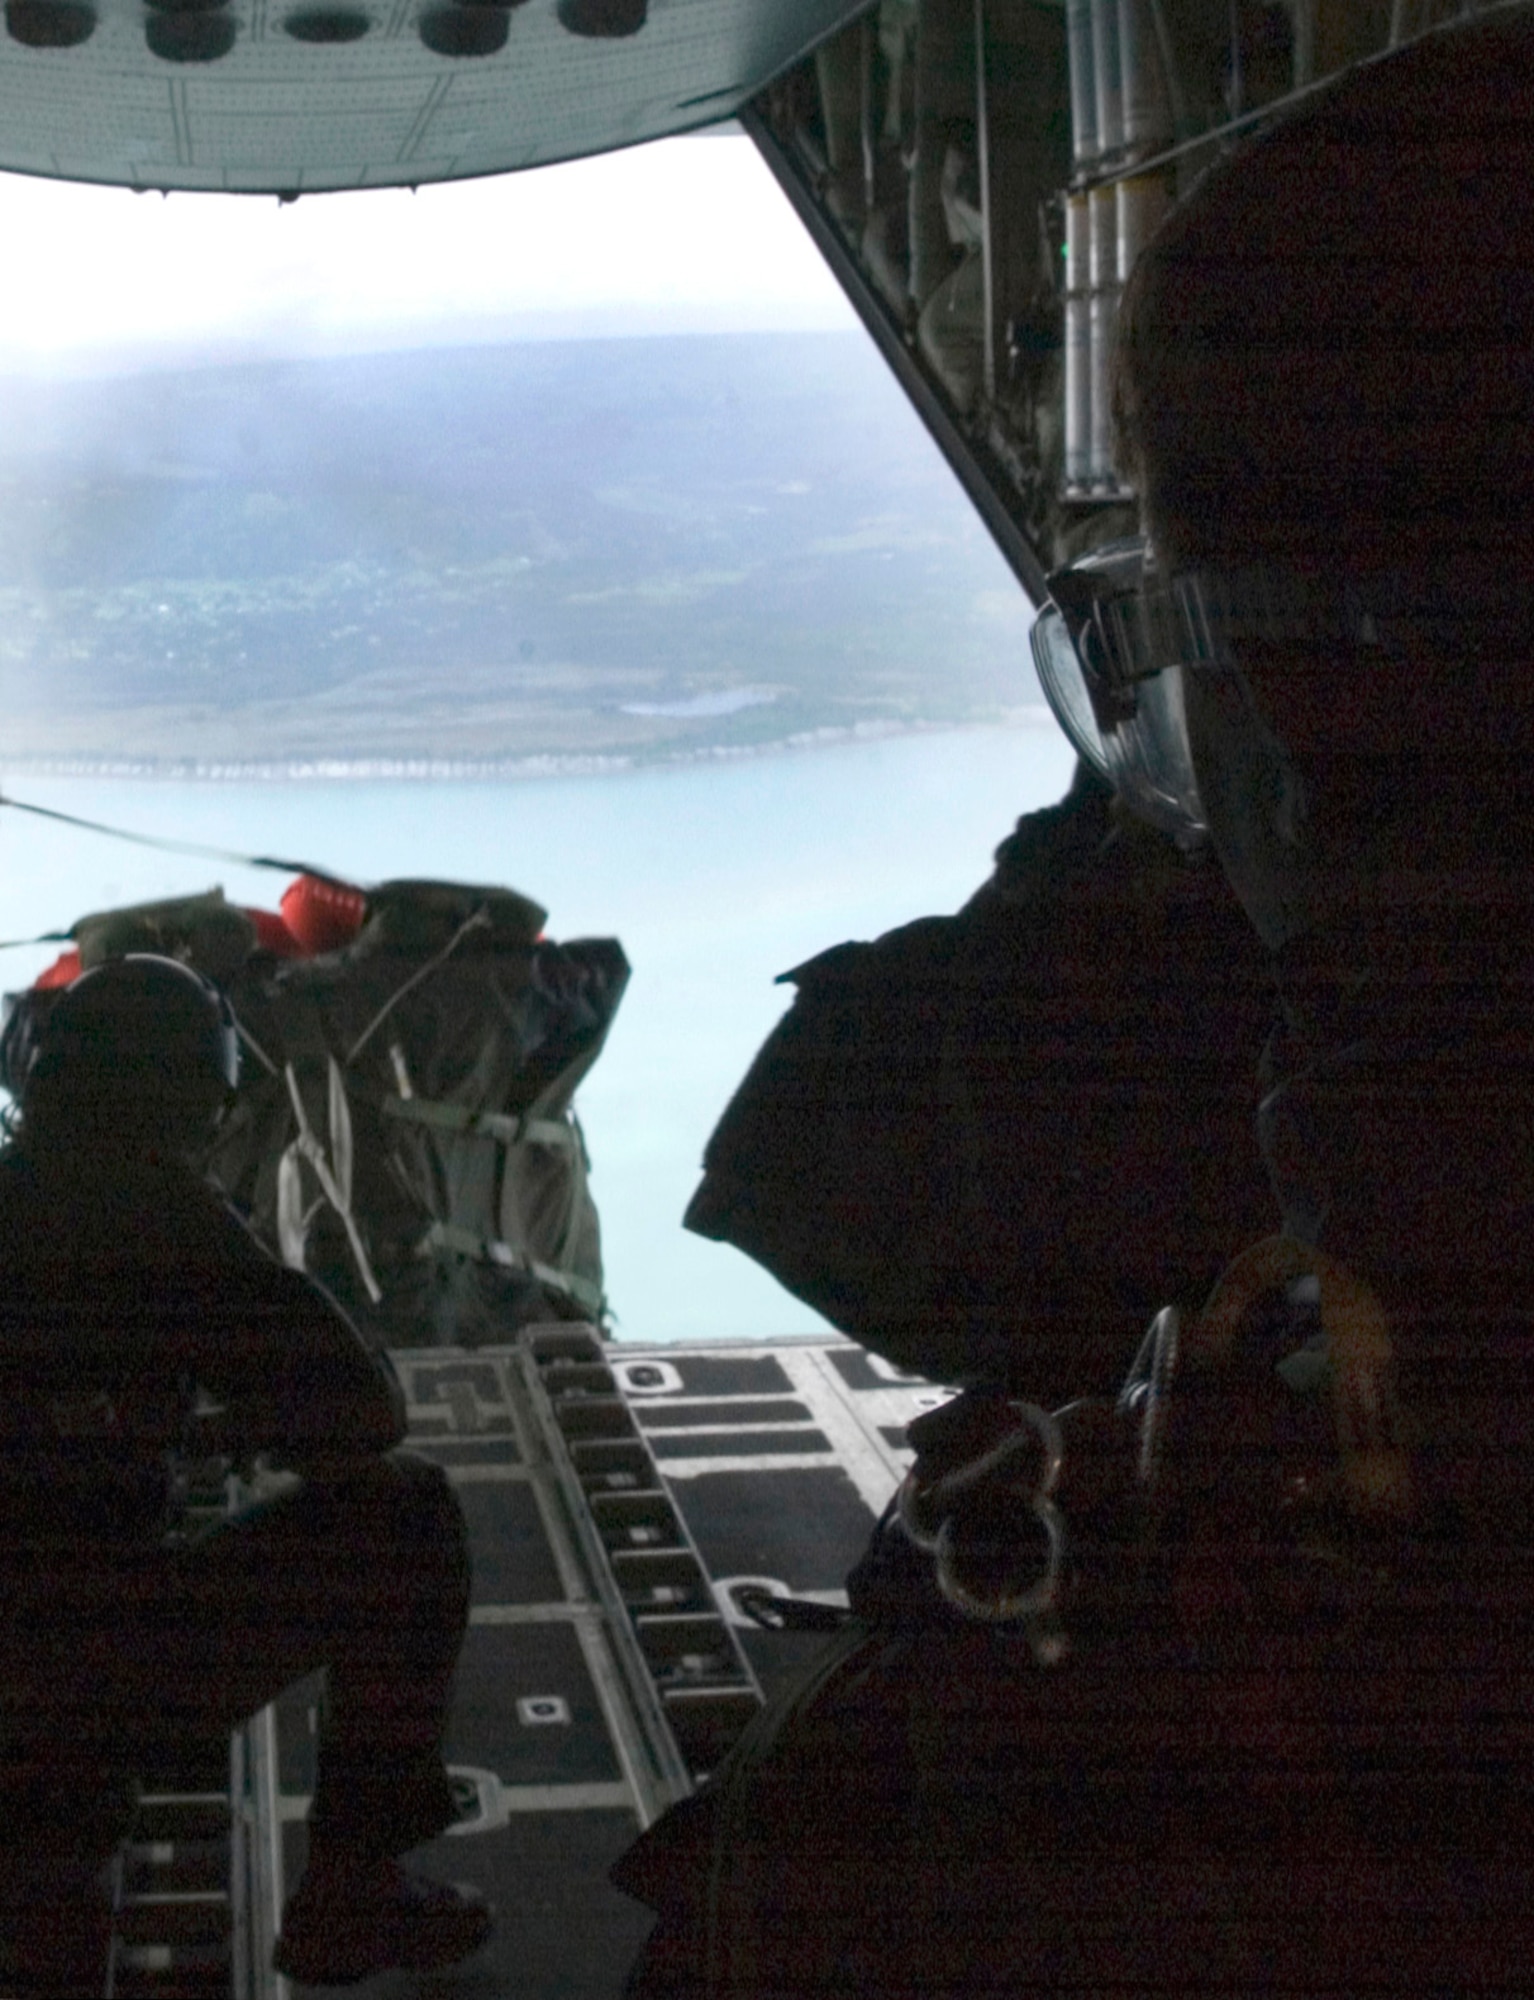 Loadmasters drop a Zodiac inflatable raft into Kachemak Bay from a HC-130 Hercules for three pararescuemen simulating downed pilots awaiting rescue in the water. Air Force pararescue jumpers assigned to bases in Japan and Alaska practiced an over-water rescue training scenario as part of Exercise Northern Edge 2006. (U.S. Marine Corps photo/Lance Cpl. Ethan Hoaldridge)